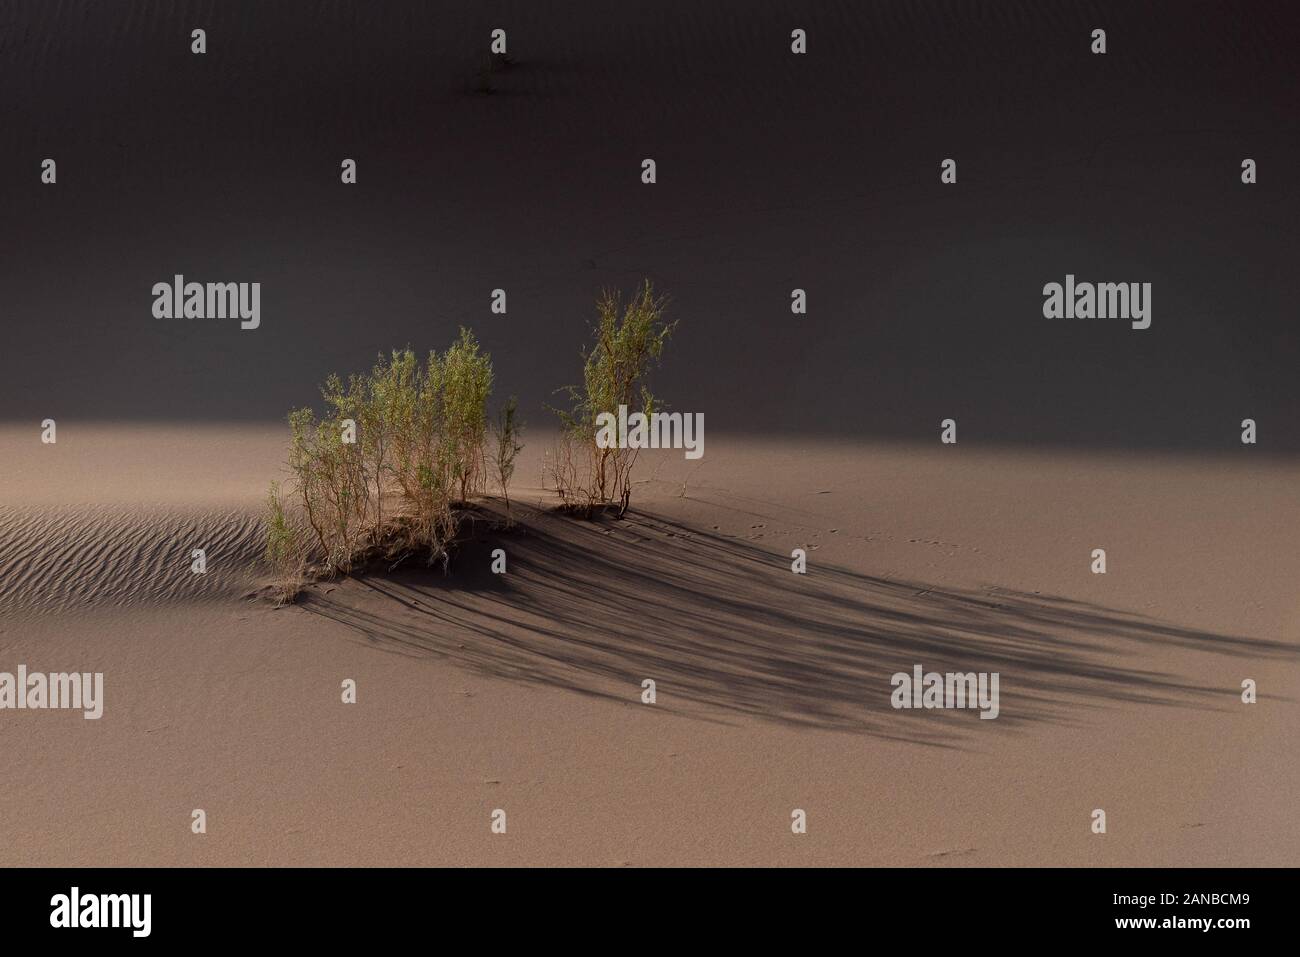 the plants which are living in the lut desert Stock Photo